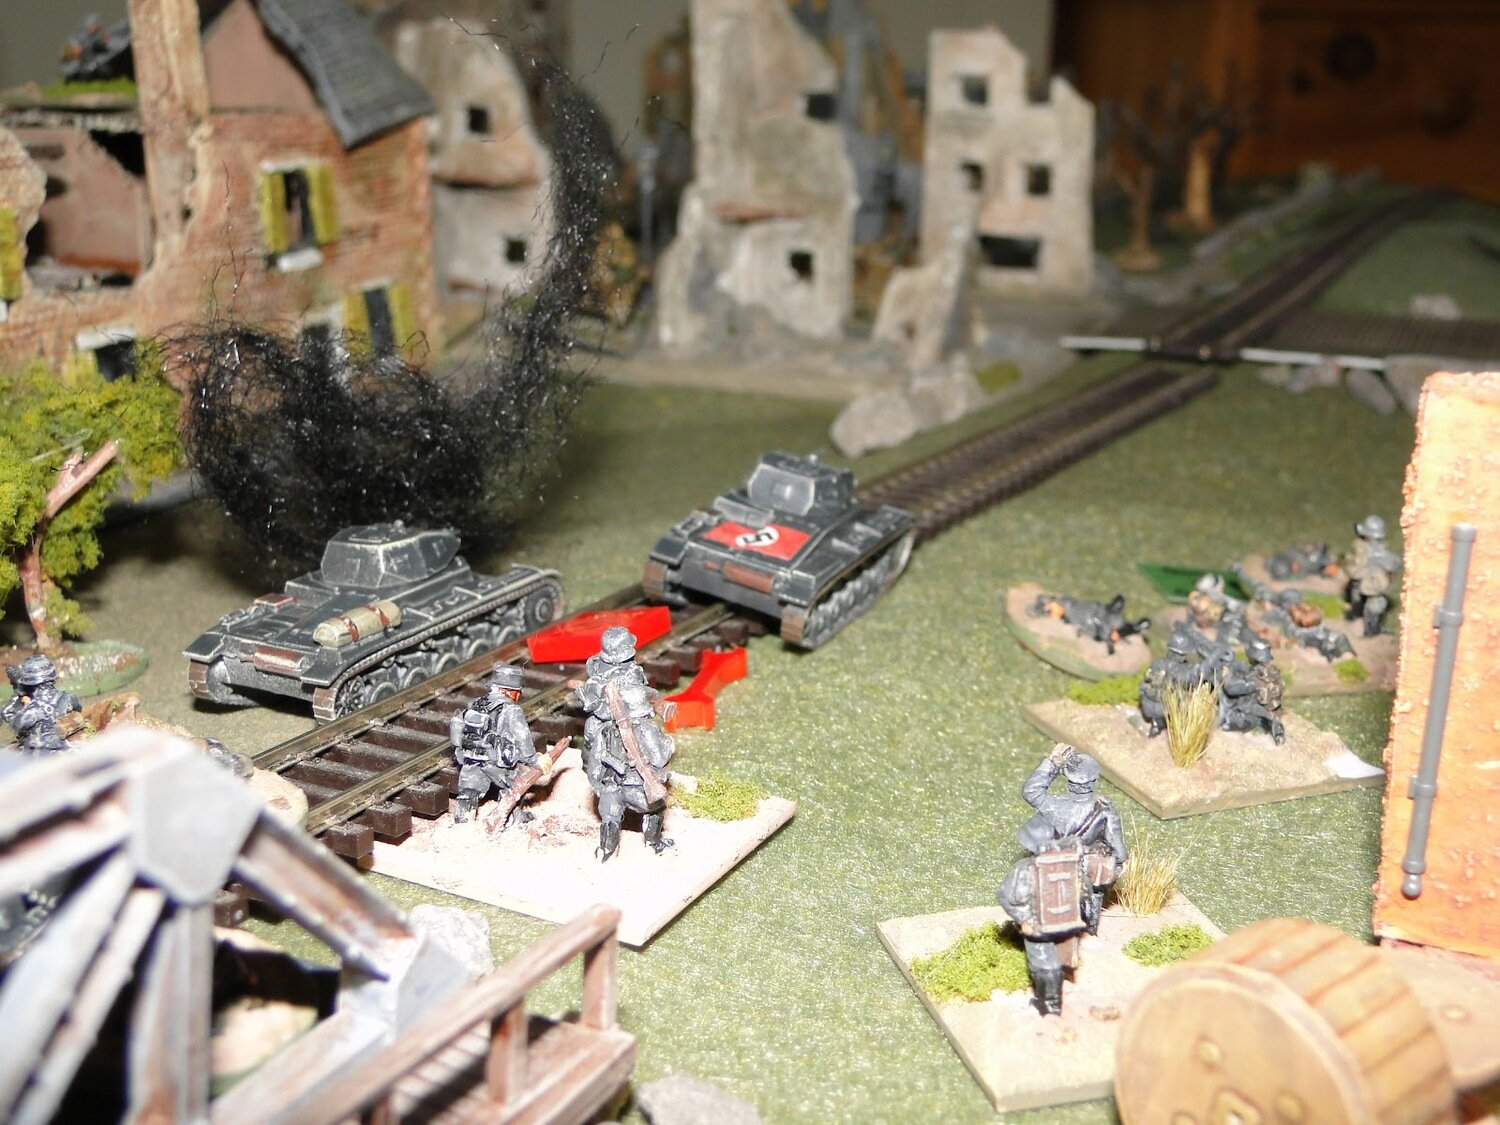  Hauptman Kliesche pushes the antitank rifle team forward behind the cover of the railway embankment. From there they take potshots at the French tanks panicking one which pulls back. 